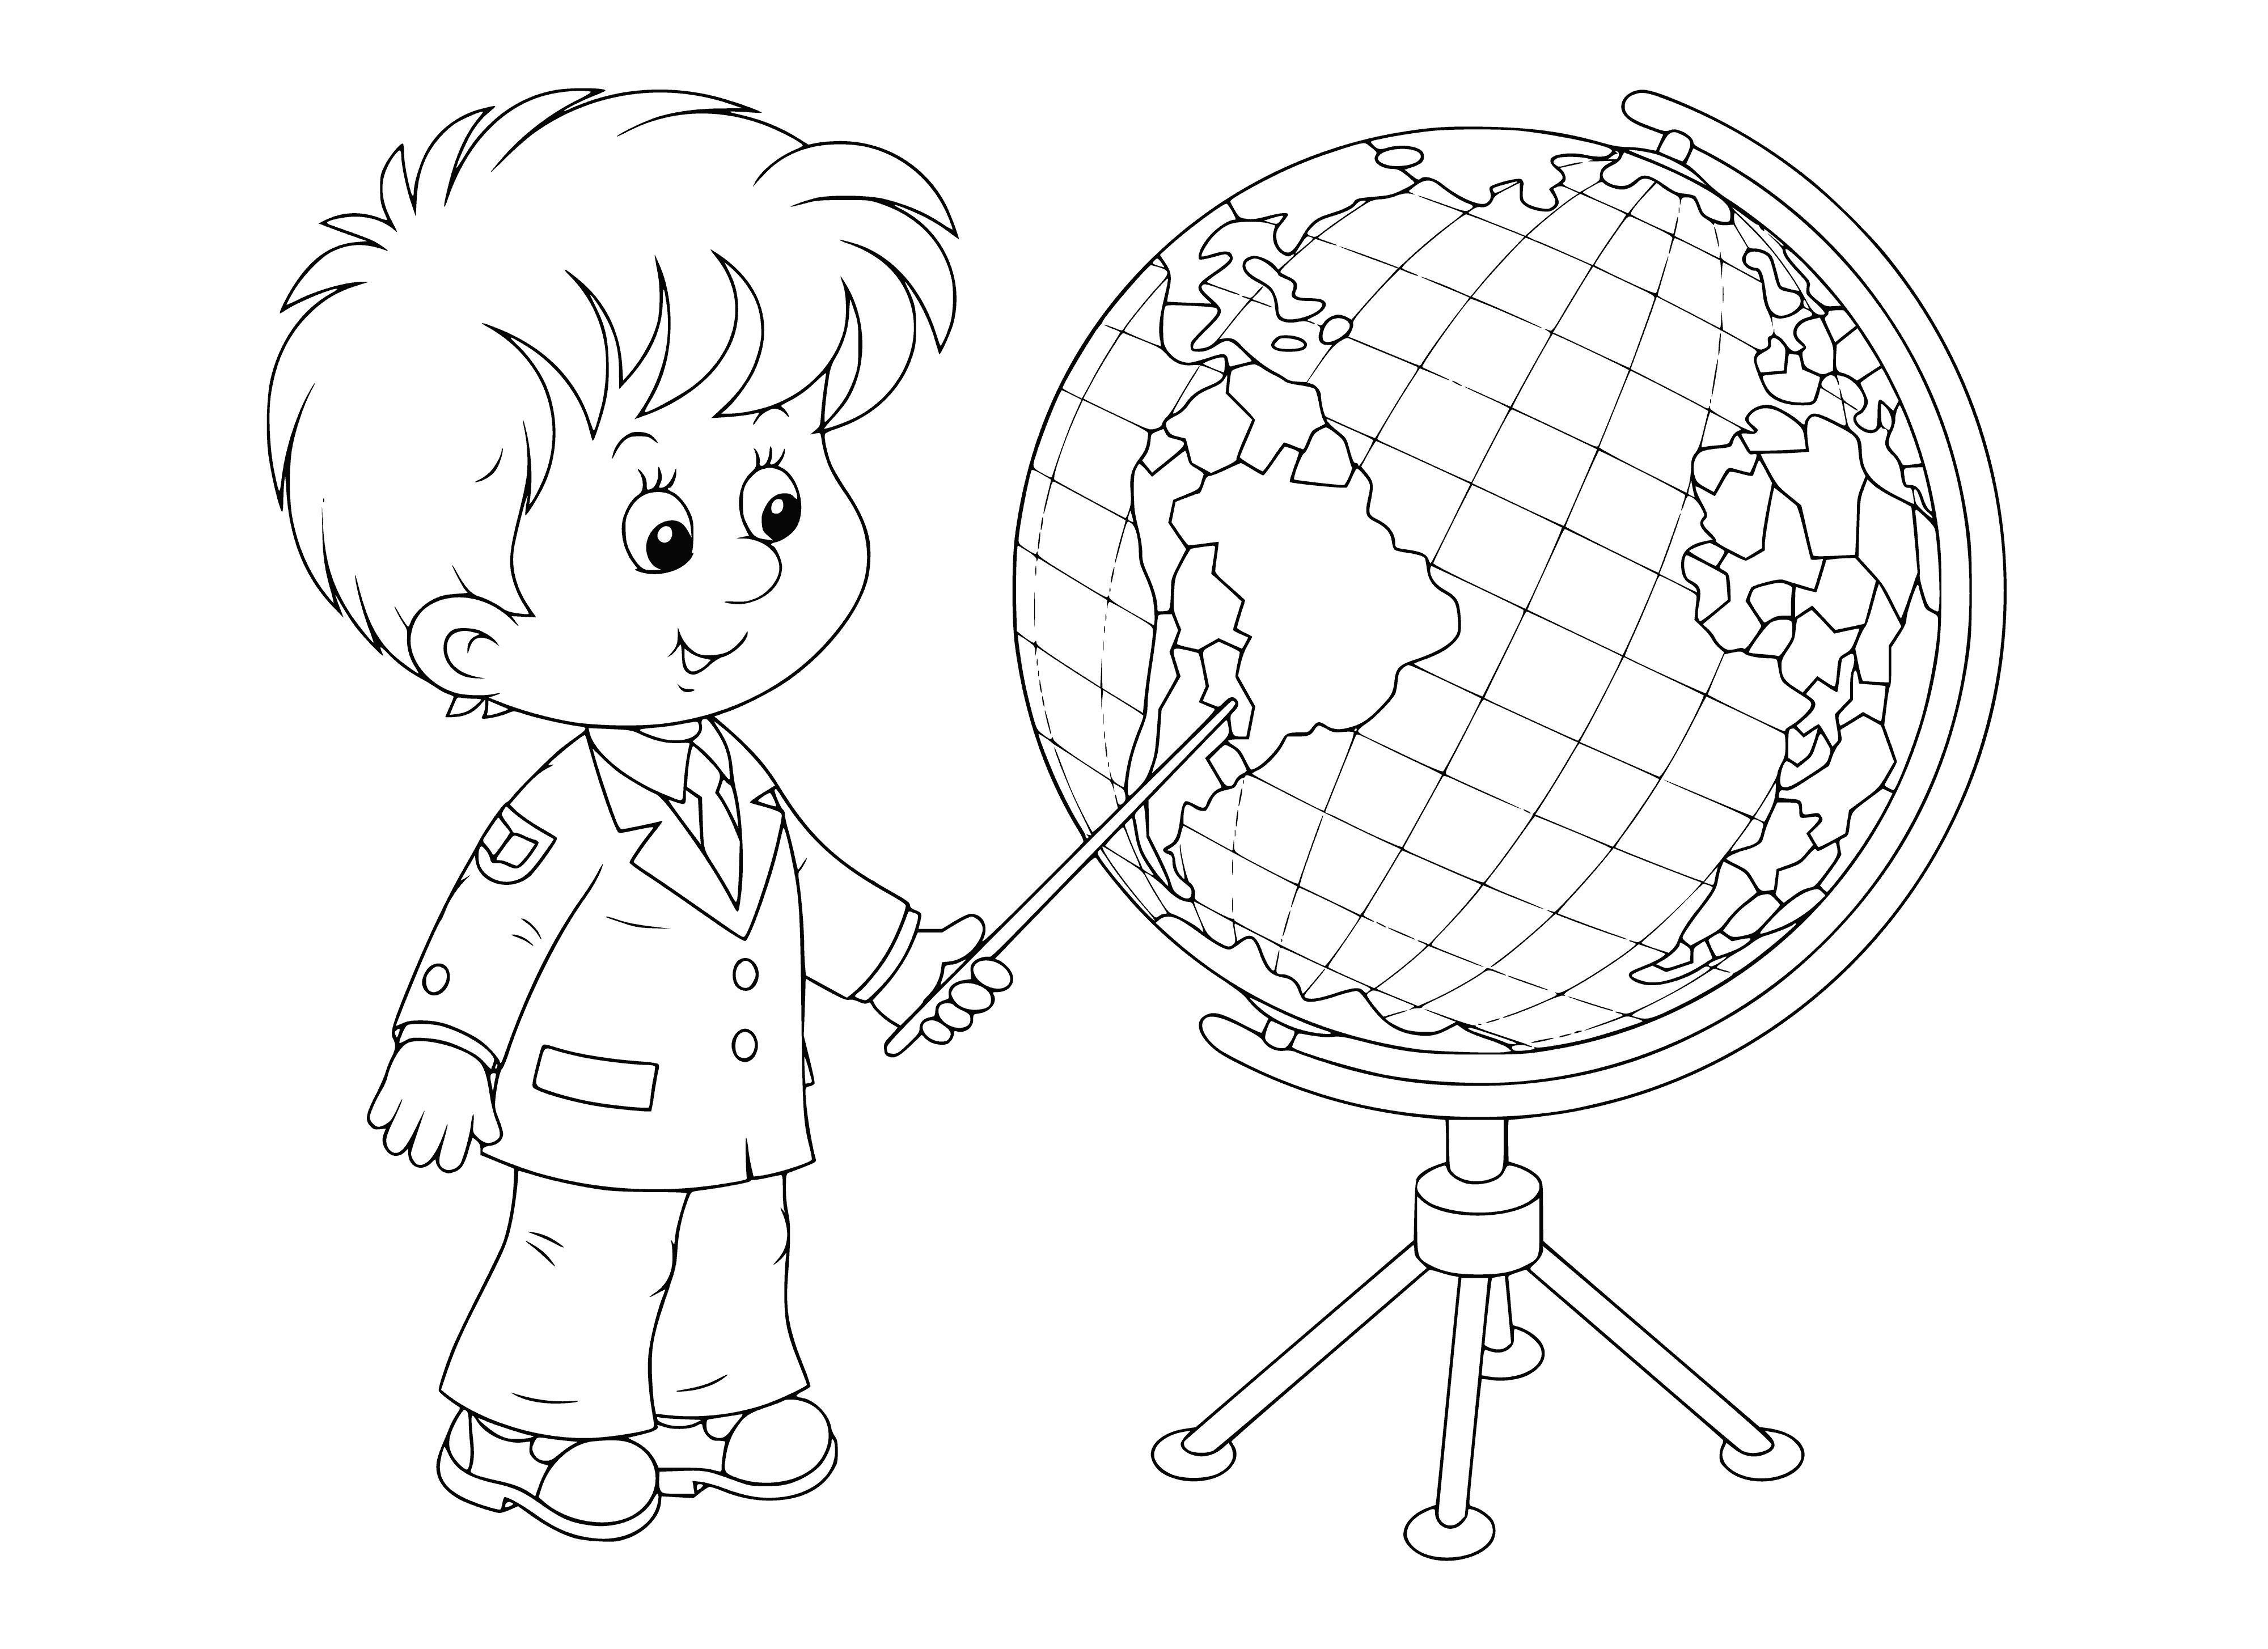 coloring page: Teacher teaches geography to attentive students, writing different places on the board.